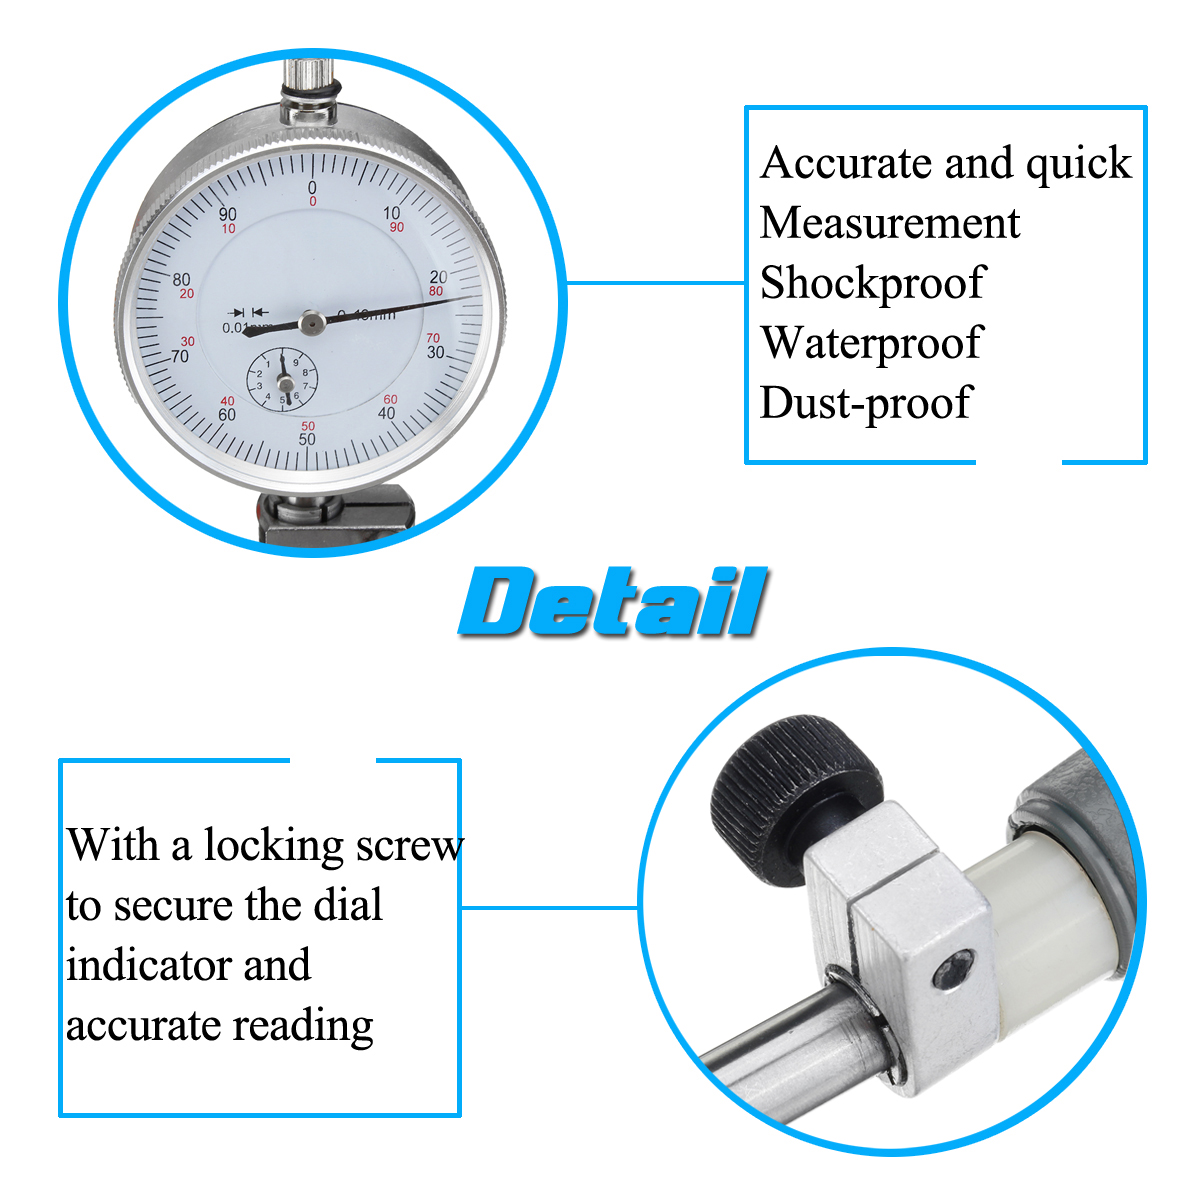 50-160mm/0.01mm Metric Dial Bore Gauge Cylinder Internal Small Inside Measuring Probe Gage Test Dial Indicator Measuring Tools